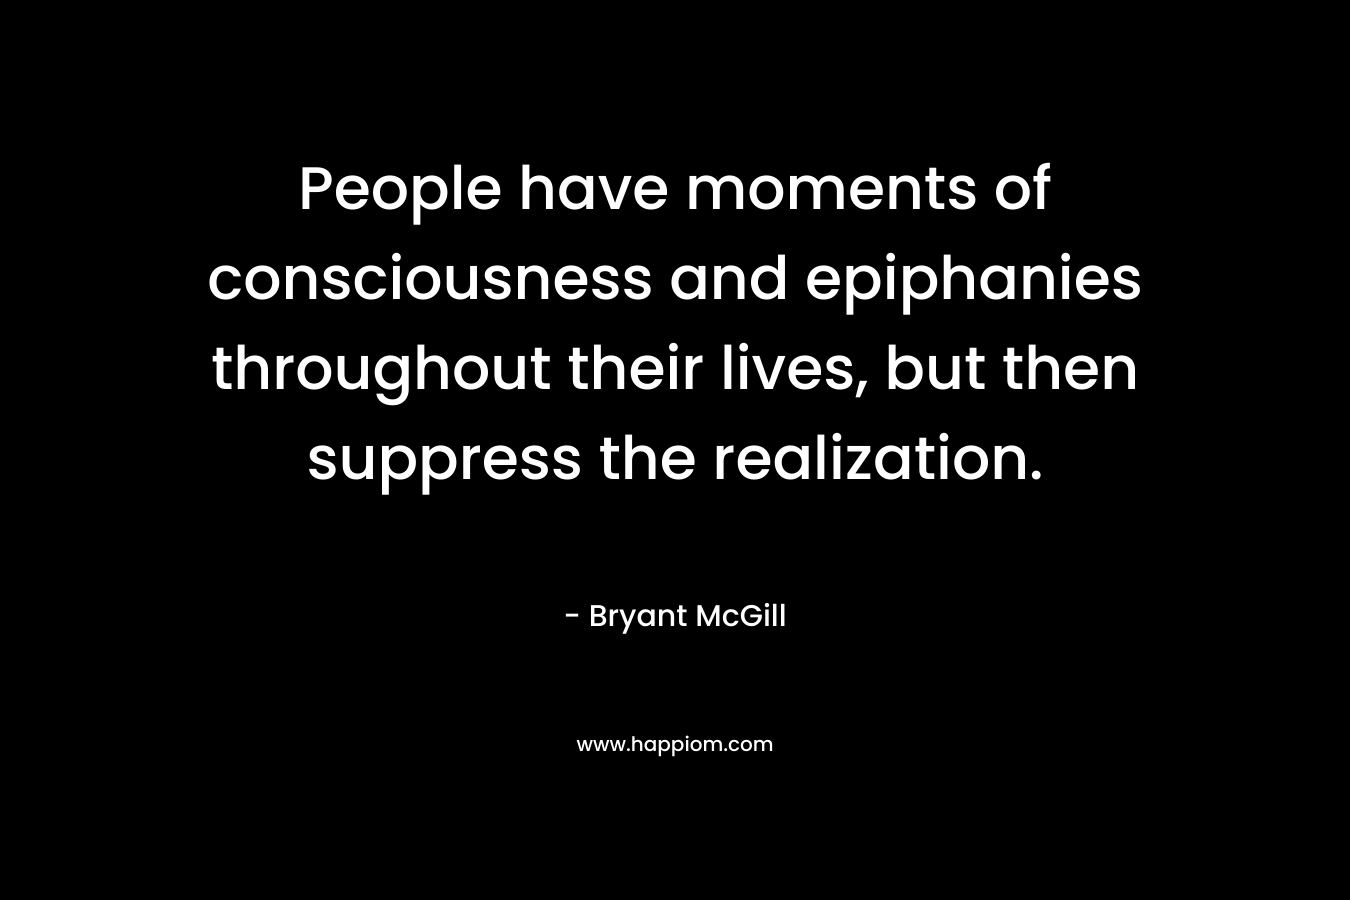 People have moments of consciousness and epiphanies throughout their lives, but then suppress the realization. – Bryant McGill